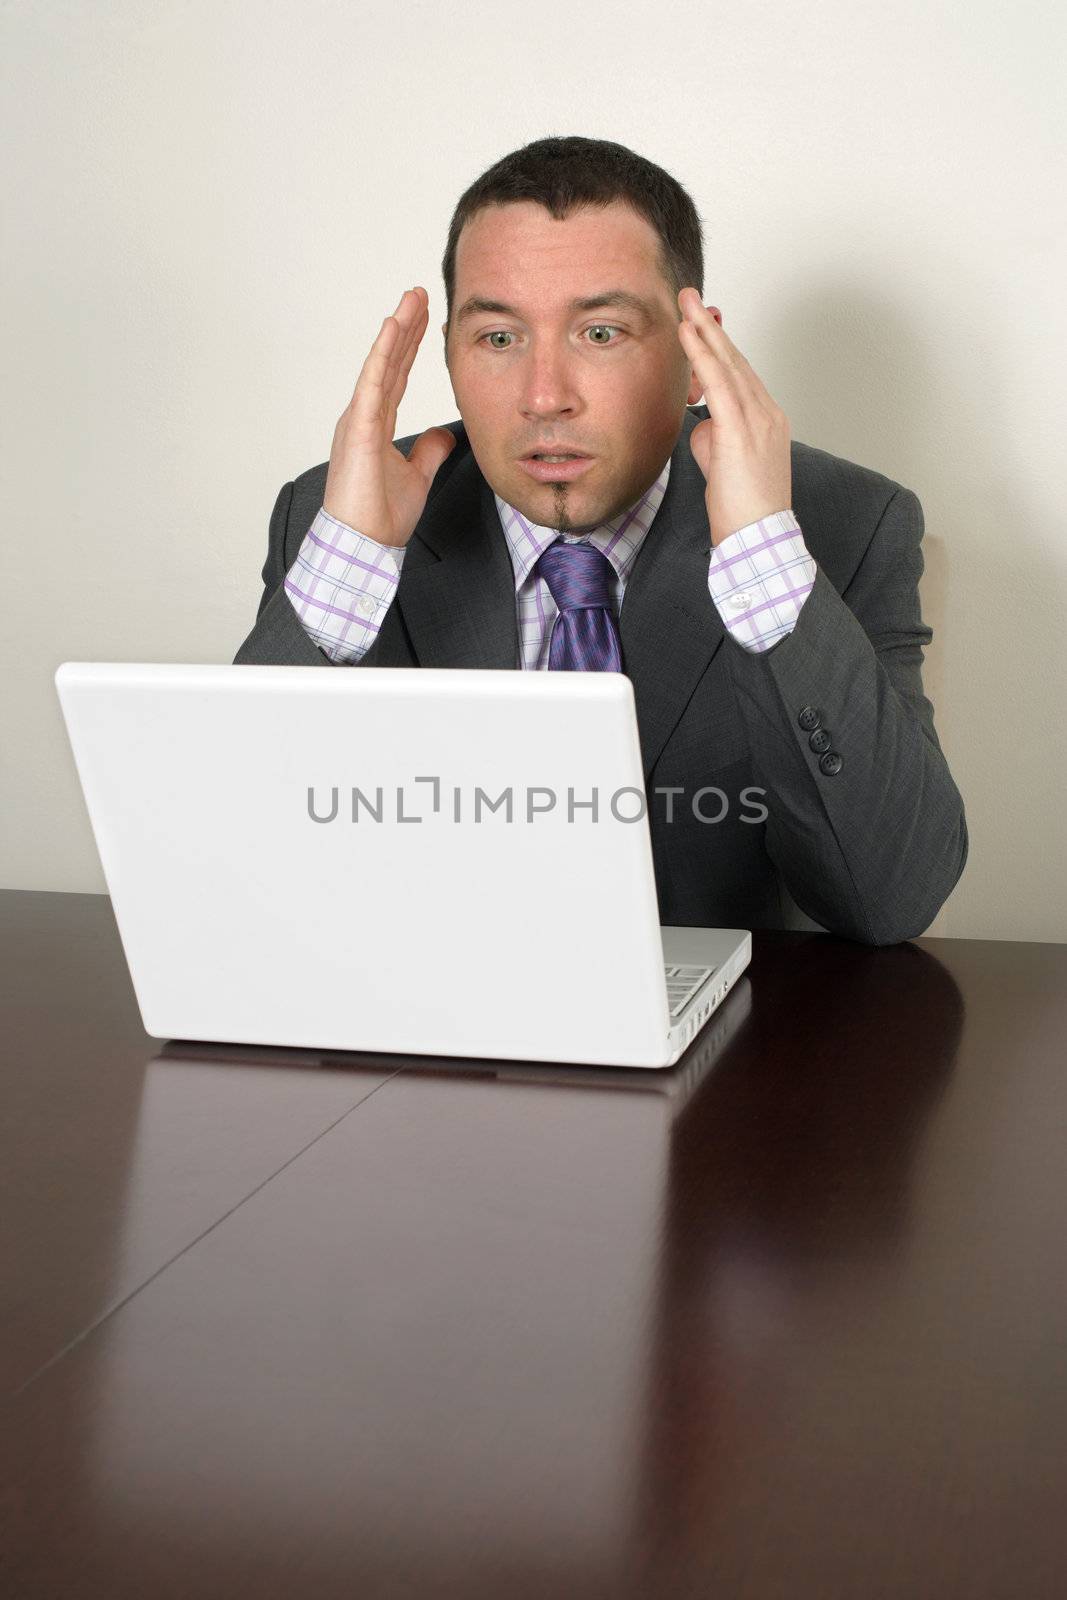 Shocked businessman in his thirties looking at a bad thing on his laptop.
